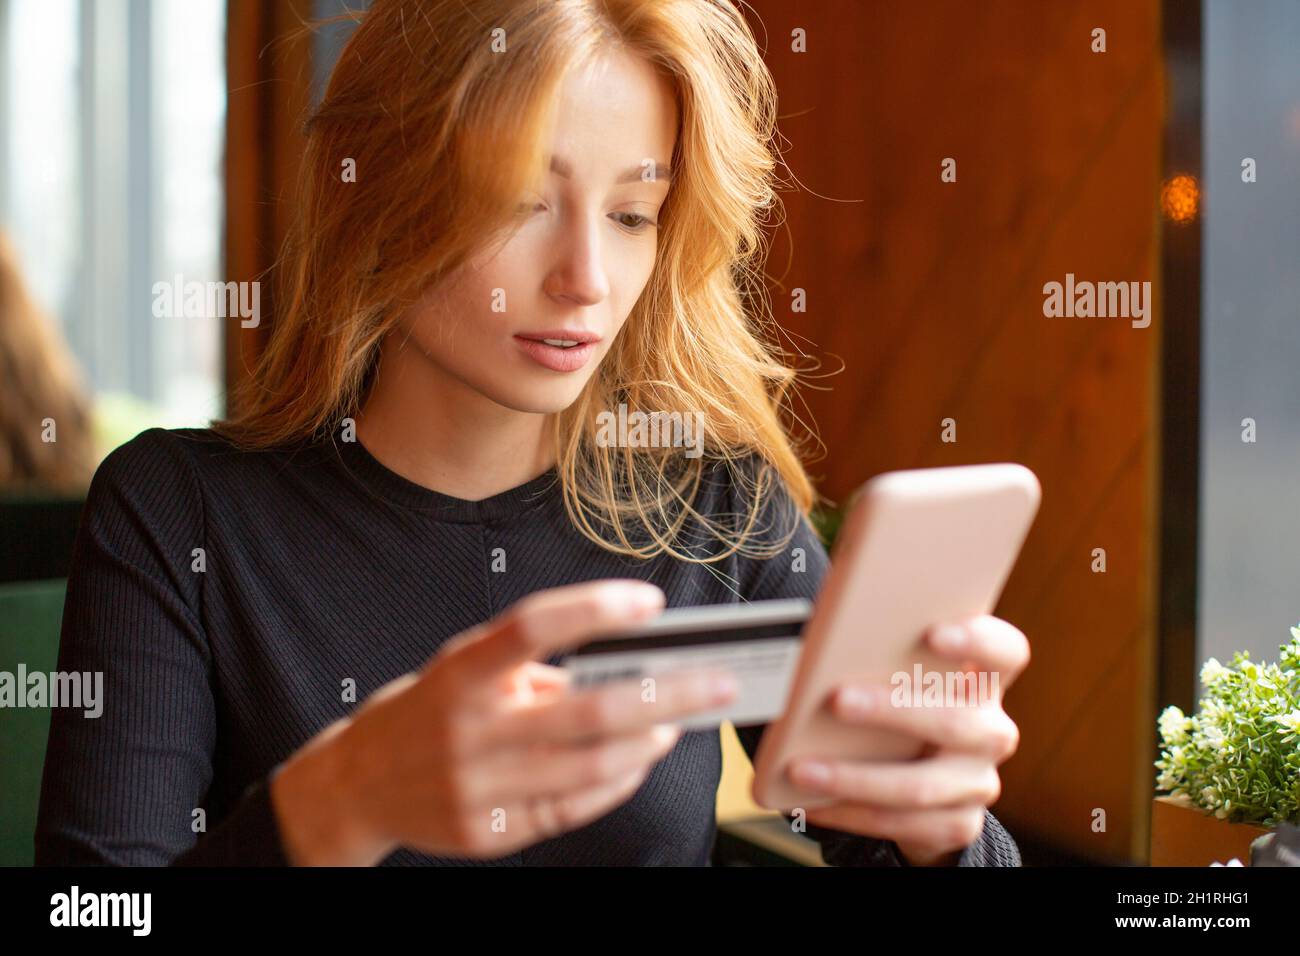 Red haired young woman making card payment through mobile phone to pay bills at a cafe. Close up. Stock Photo